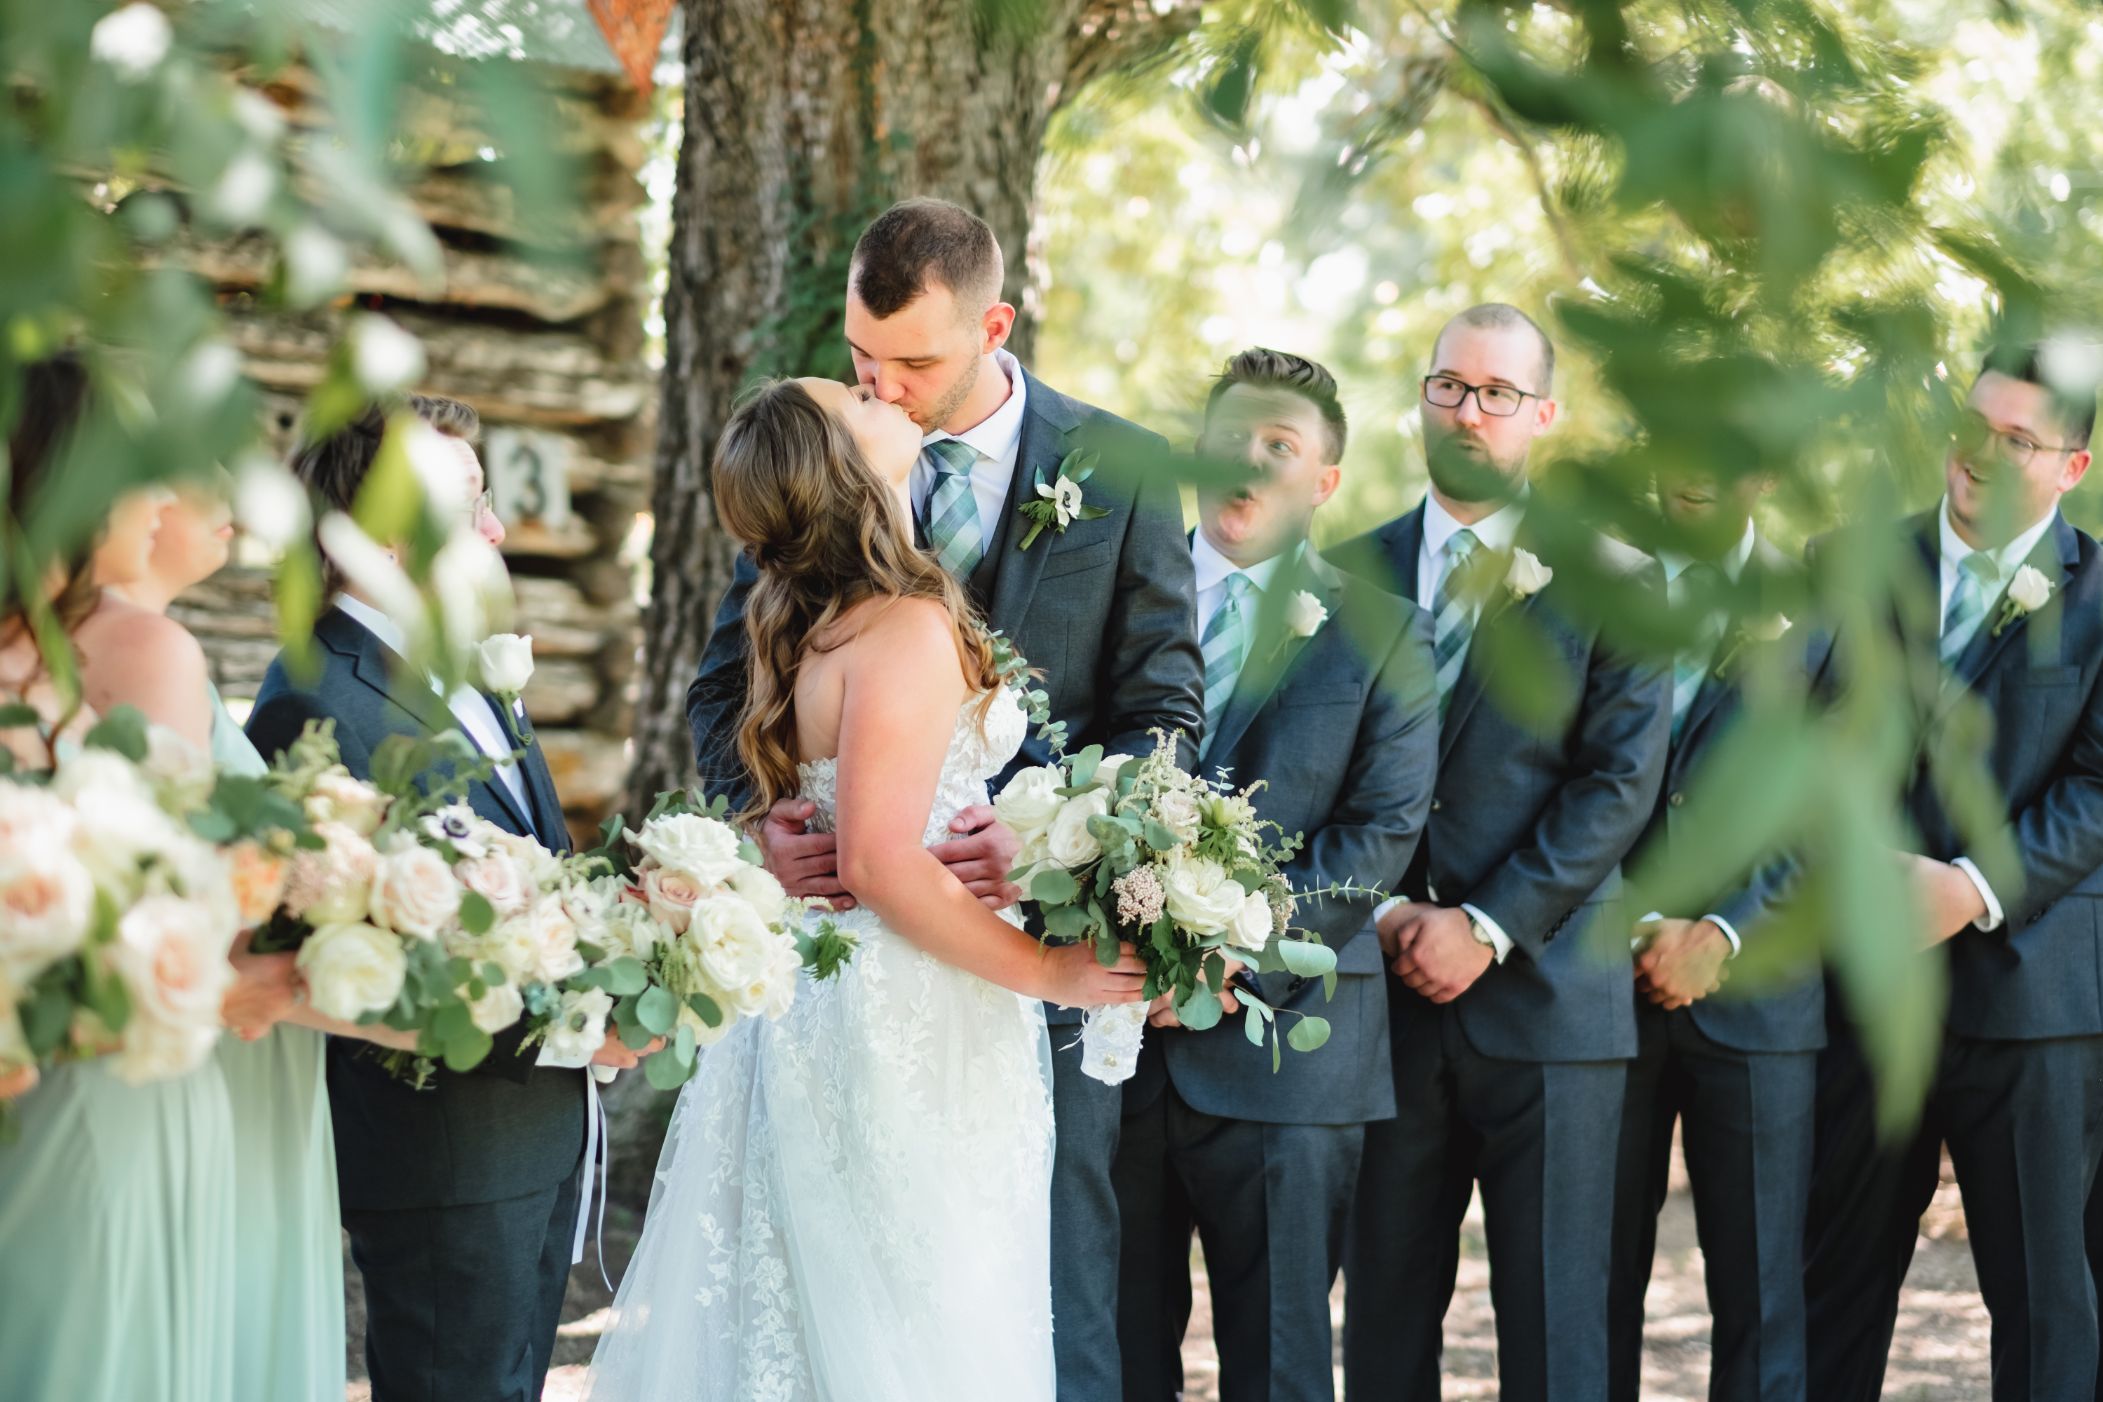 Groom and bride kiss under a large green tree. Bridal party is looking in excitement for the couple.